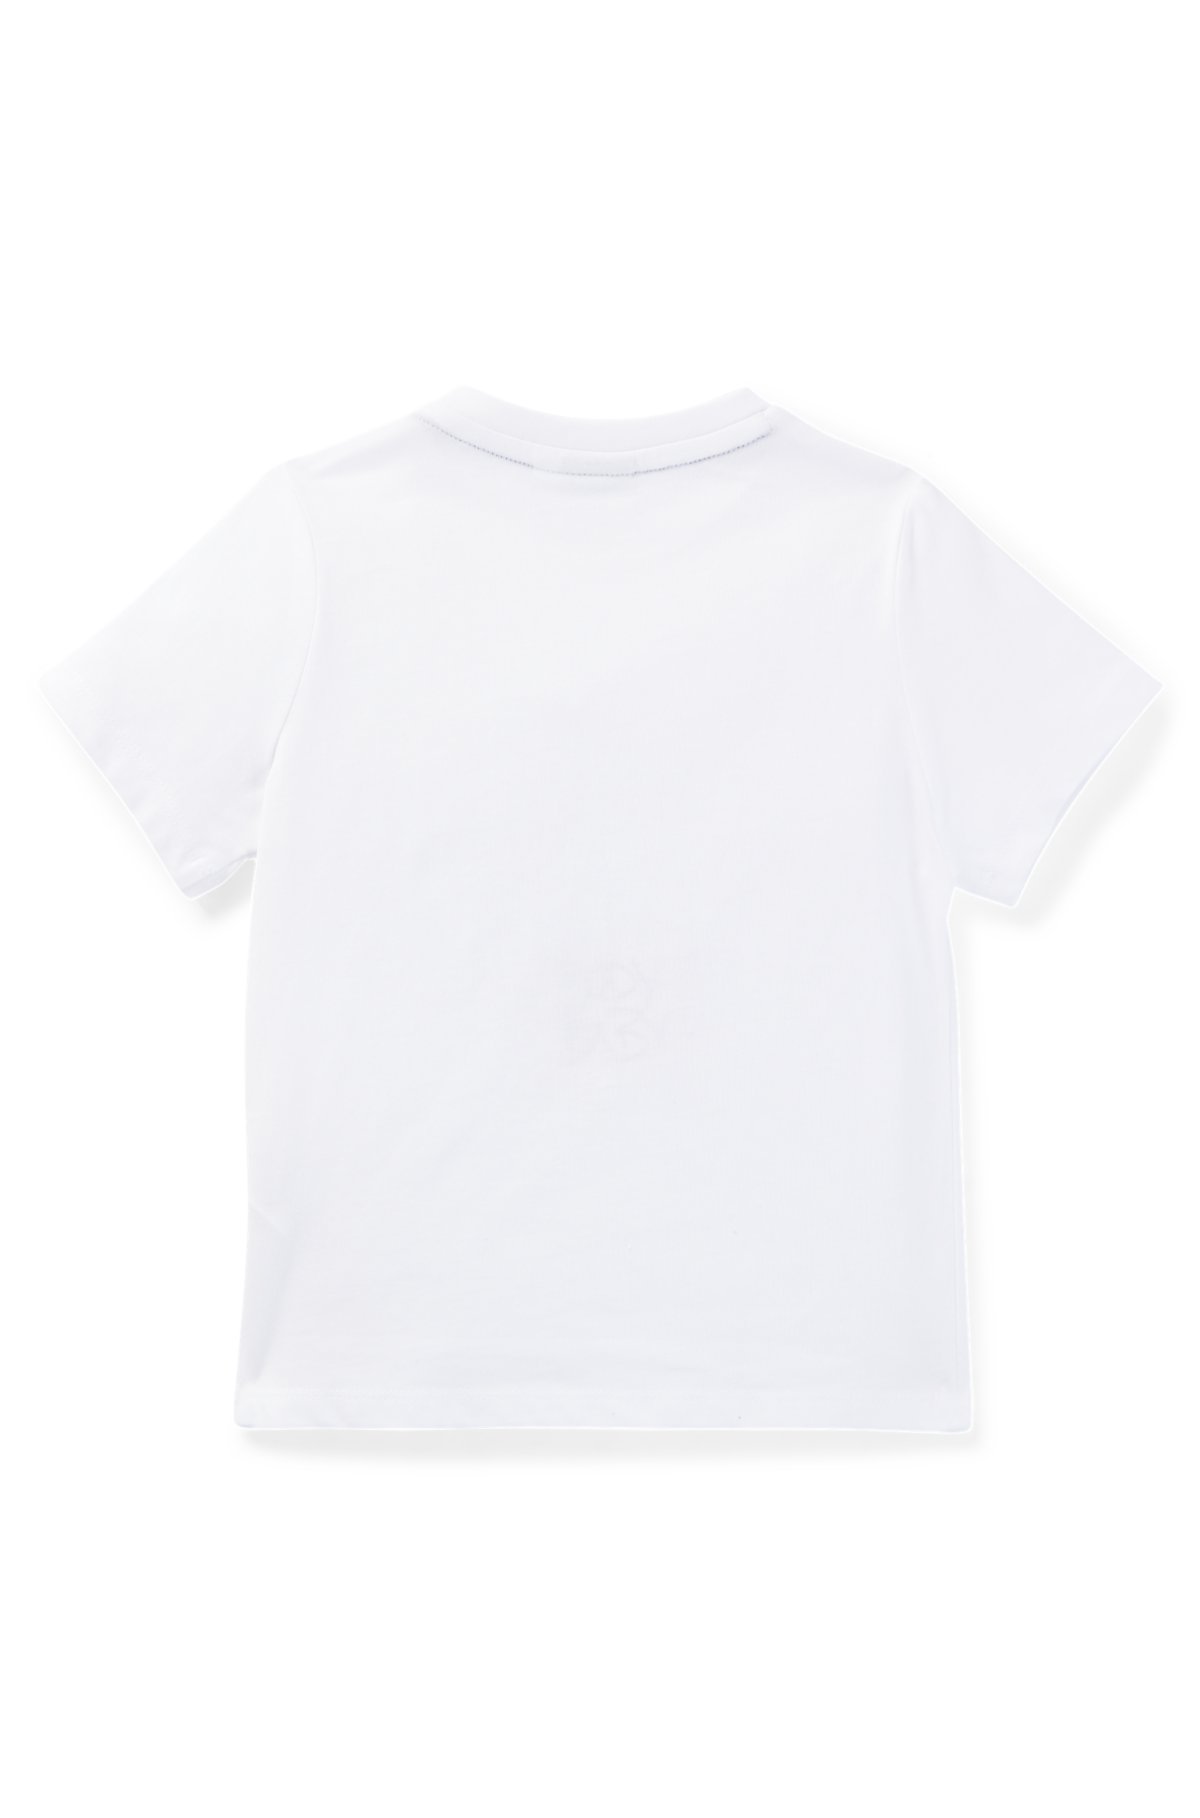 Kids' T-shirt in cotton jersey with repeat logos, White